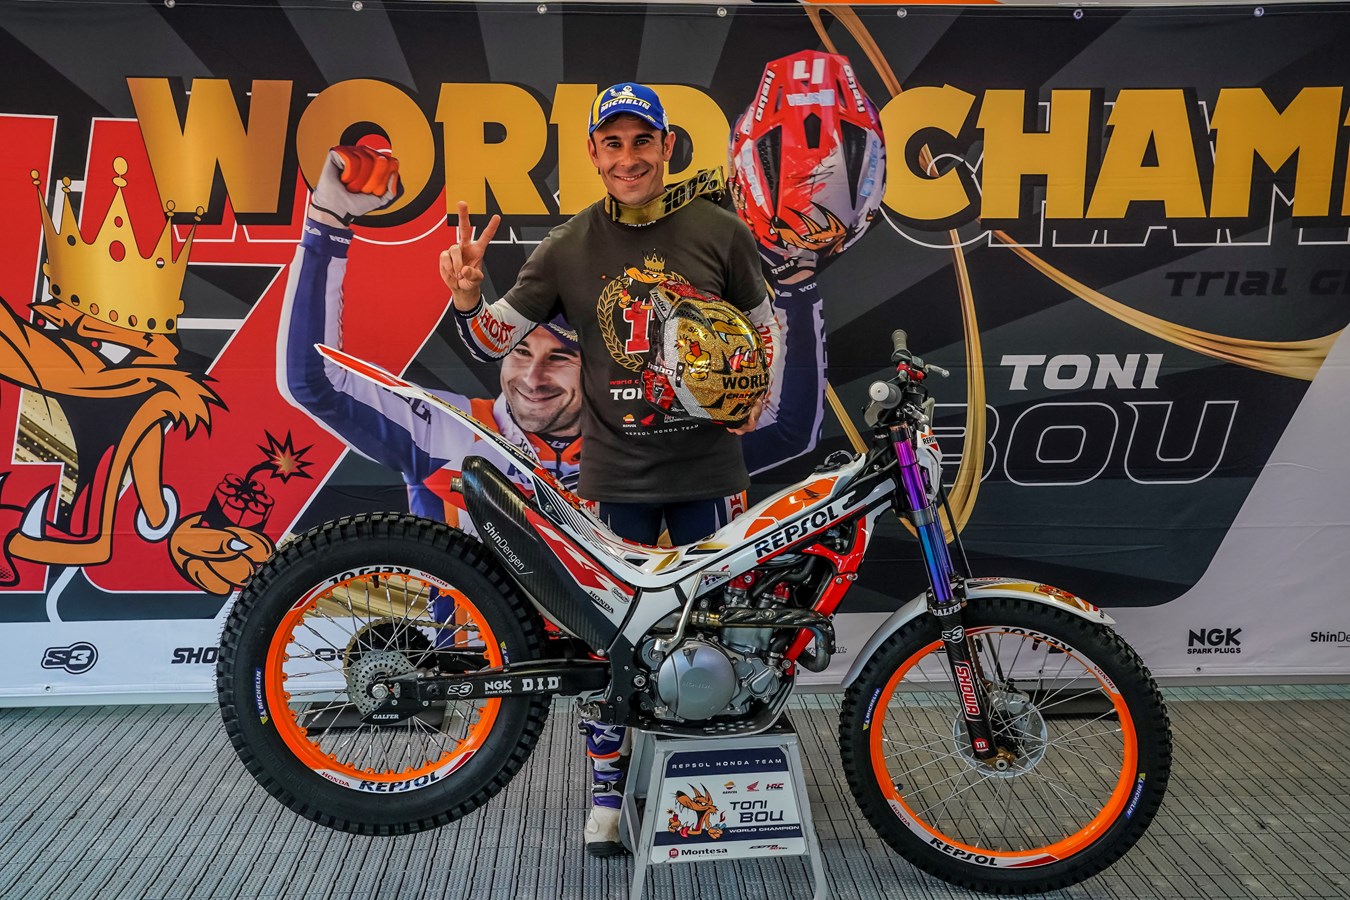 Victory and title for Bou on first day in France